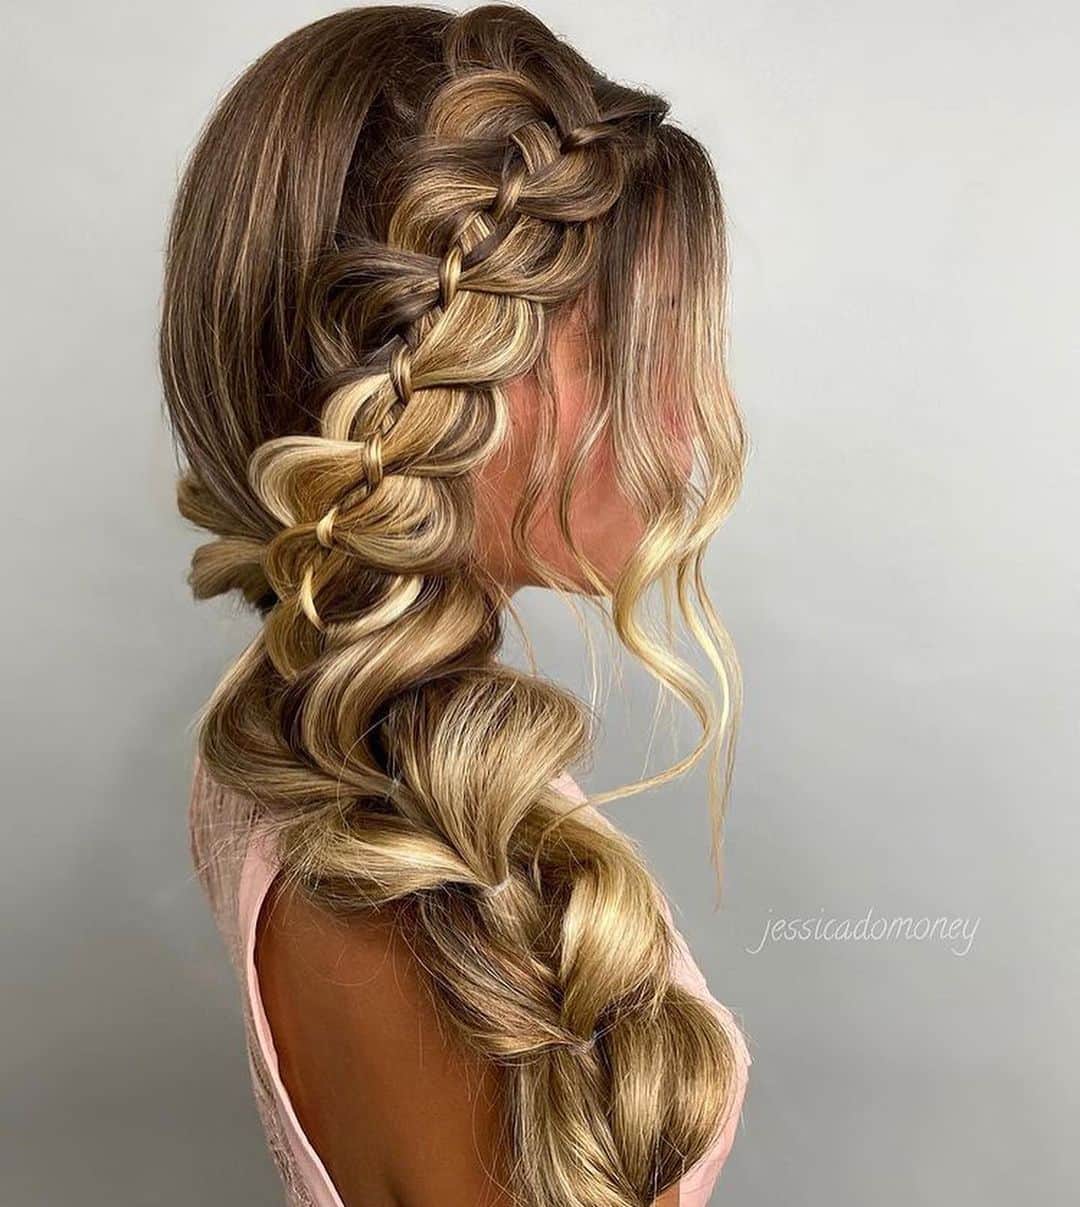 I N S T A B R A I Dのインスタグラム：「Some of the prettiest braids I’ve seen in a while 😍 all by @jessicadomoney !」